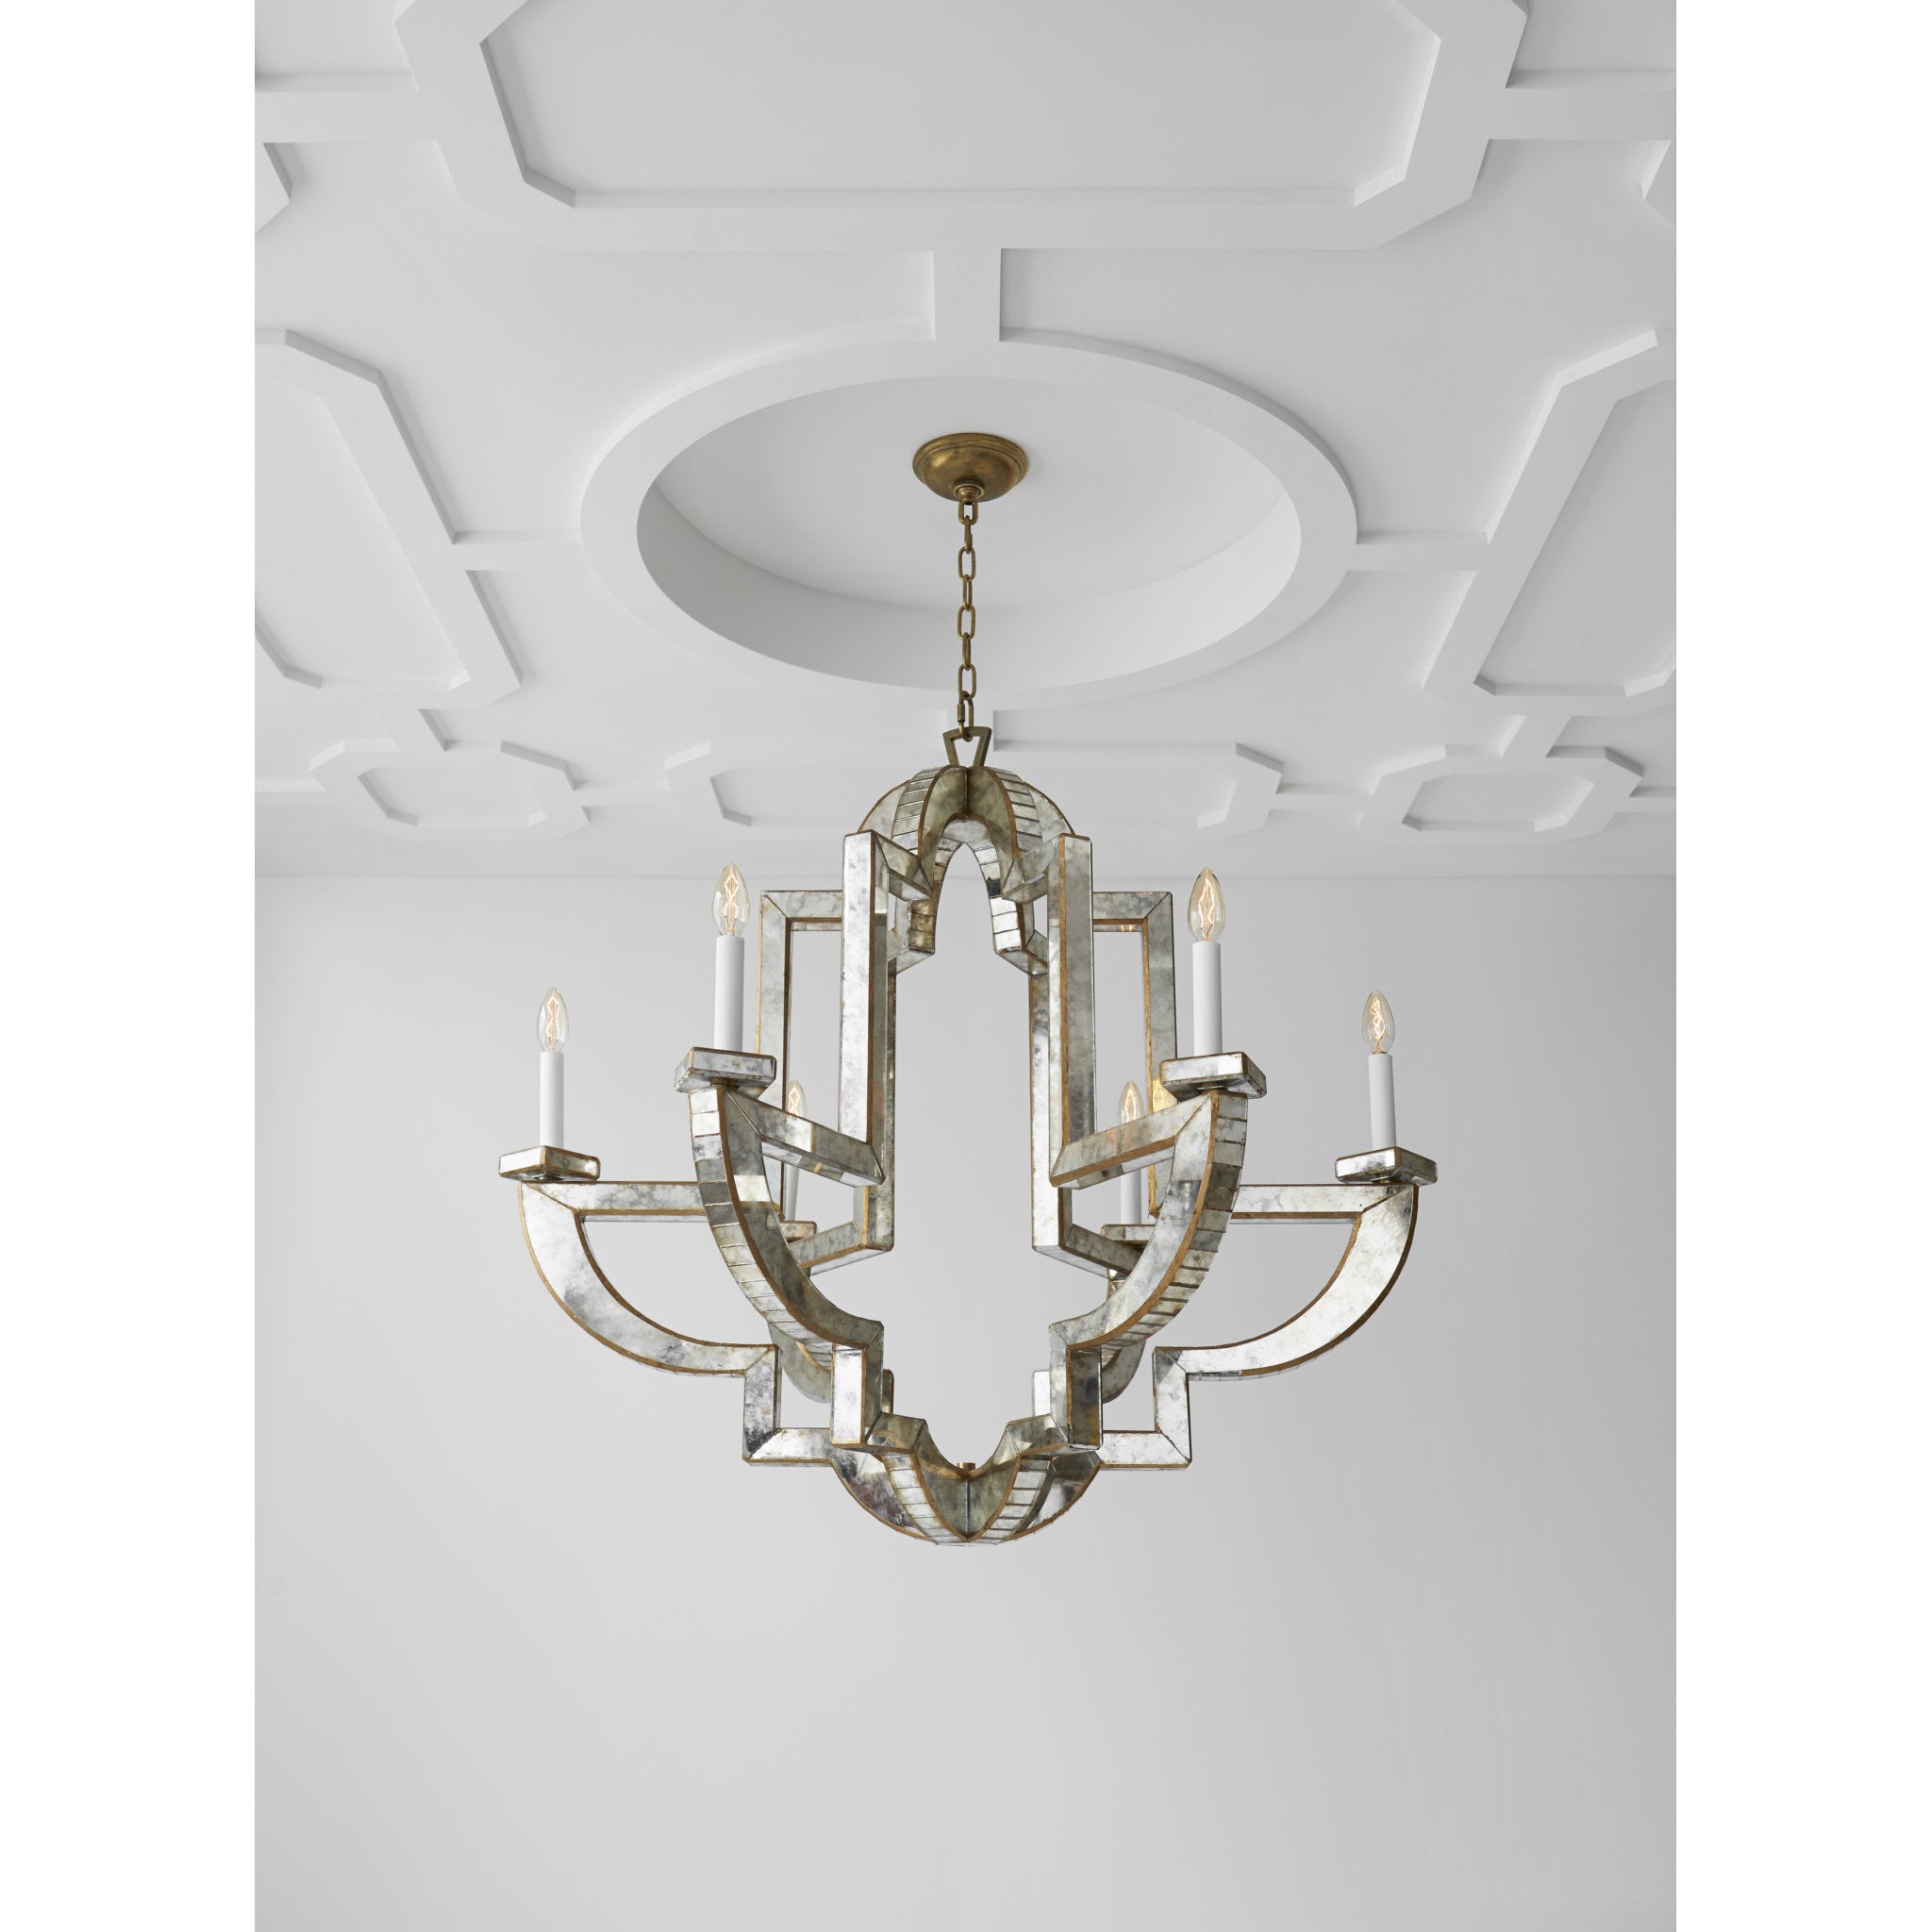 Niermann Weeks Lido Large Chandelier in Antique Mirror and Hand-Rubbed Antique Brass